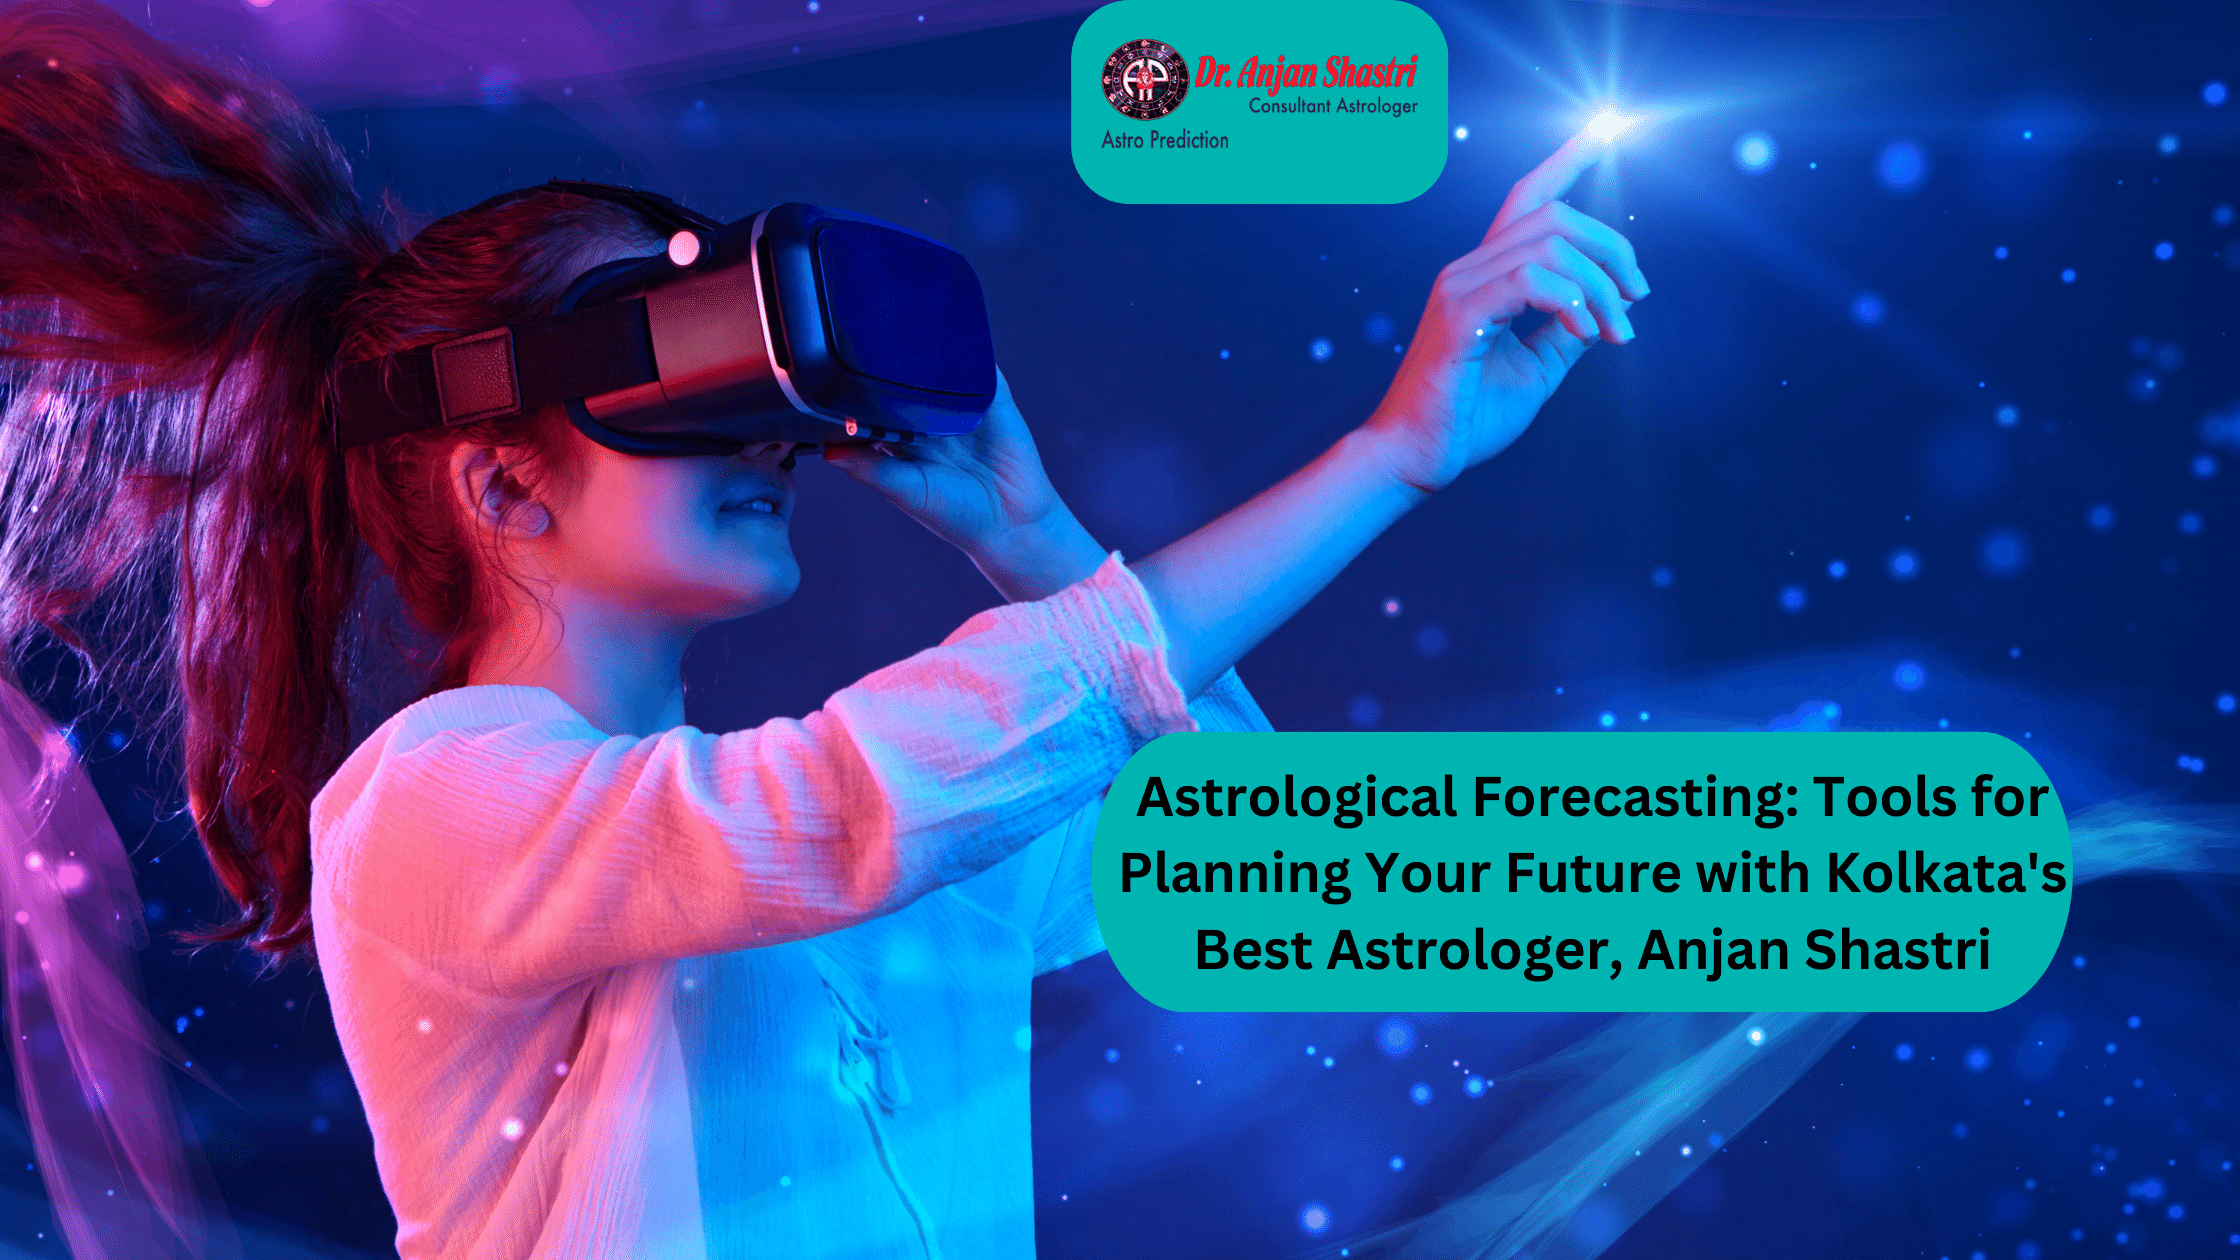 astrological-forecasting-tools-for-planning-your-future-with-kolkatas-best-astrologer-anjan-shastri